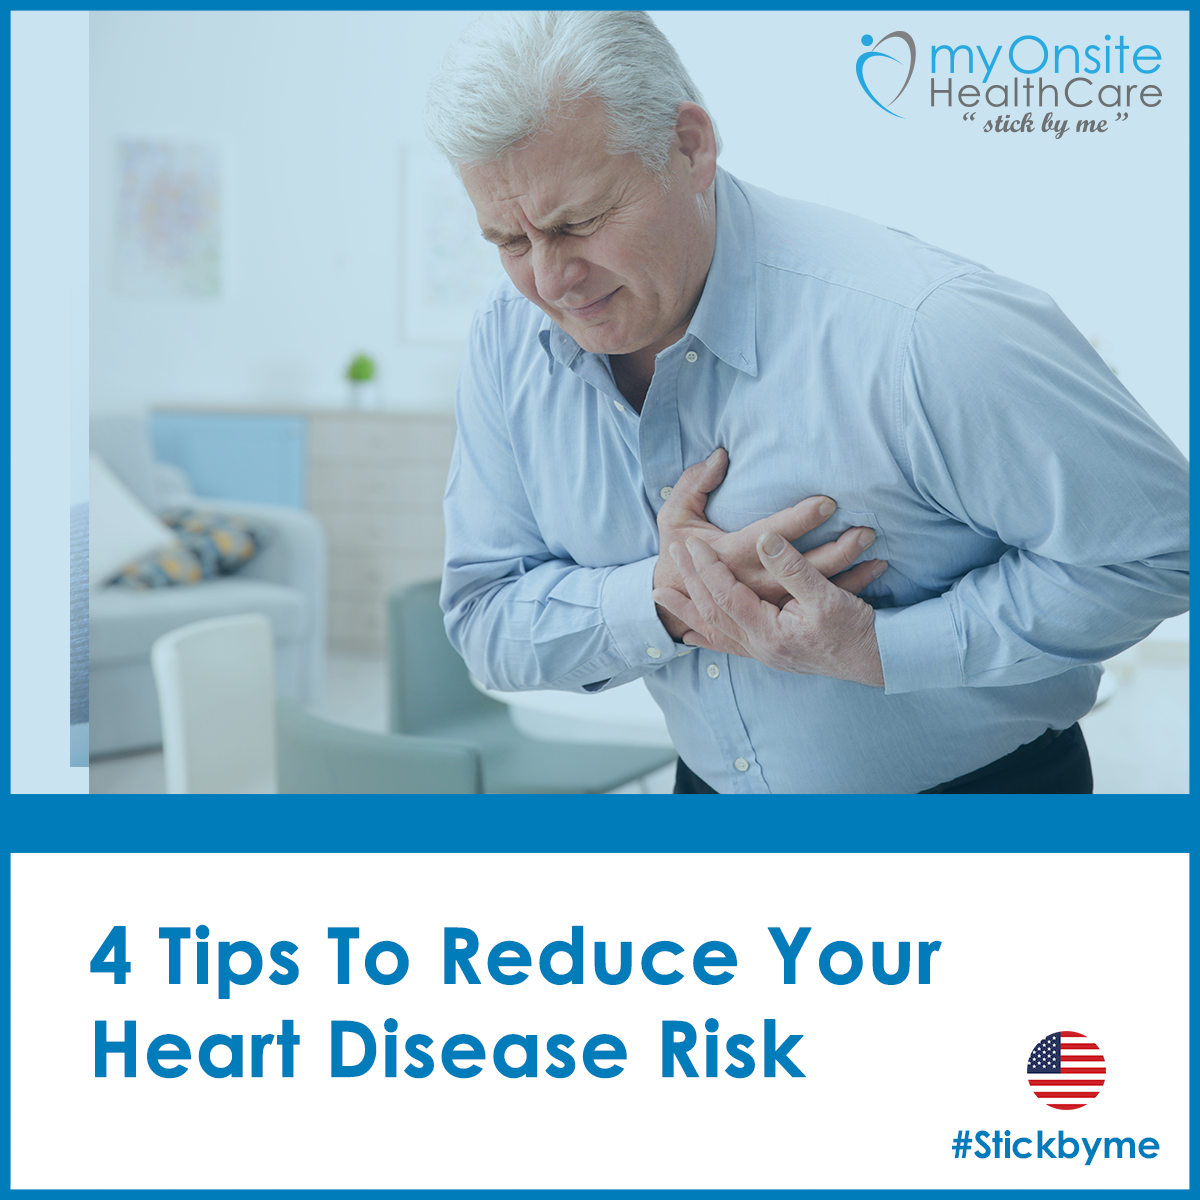 4 Tips to reduce your heart disease risk